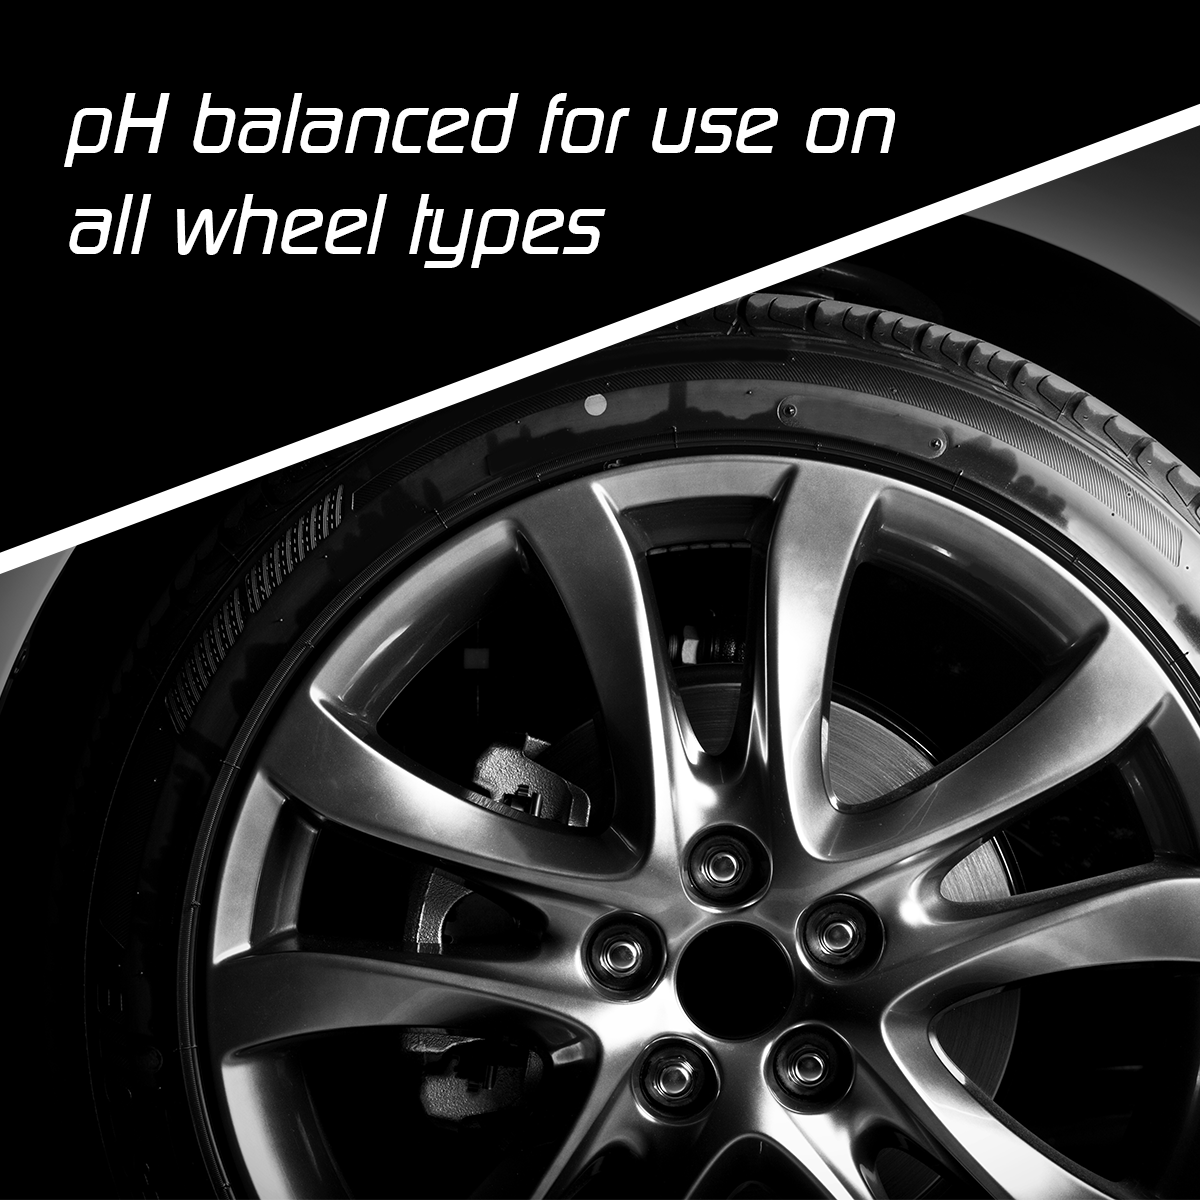 pH balanced for use on all wheel types